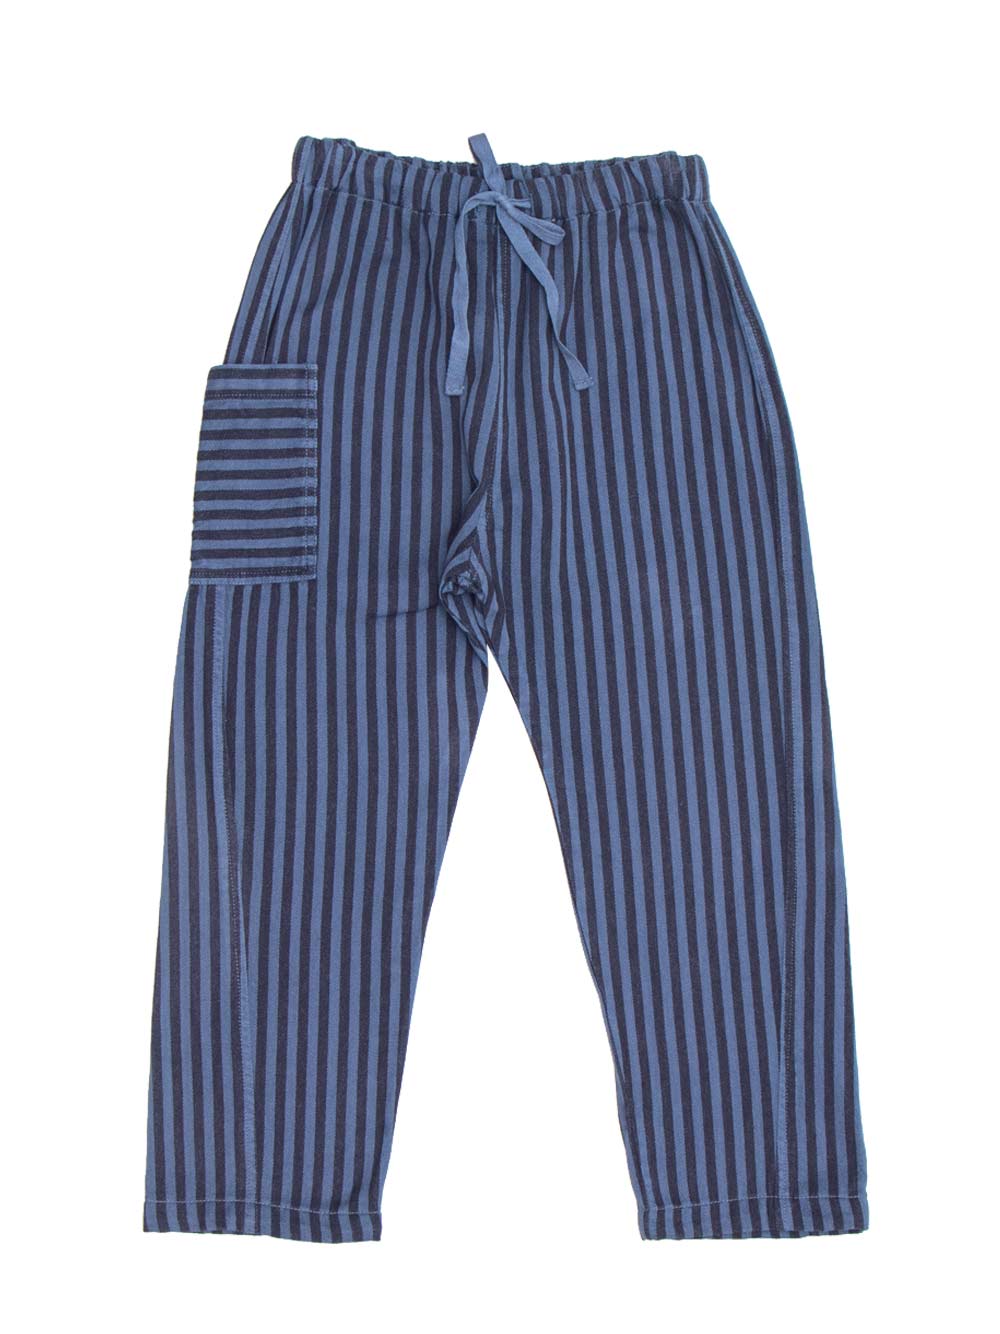 Chestnut Striped Trousers